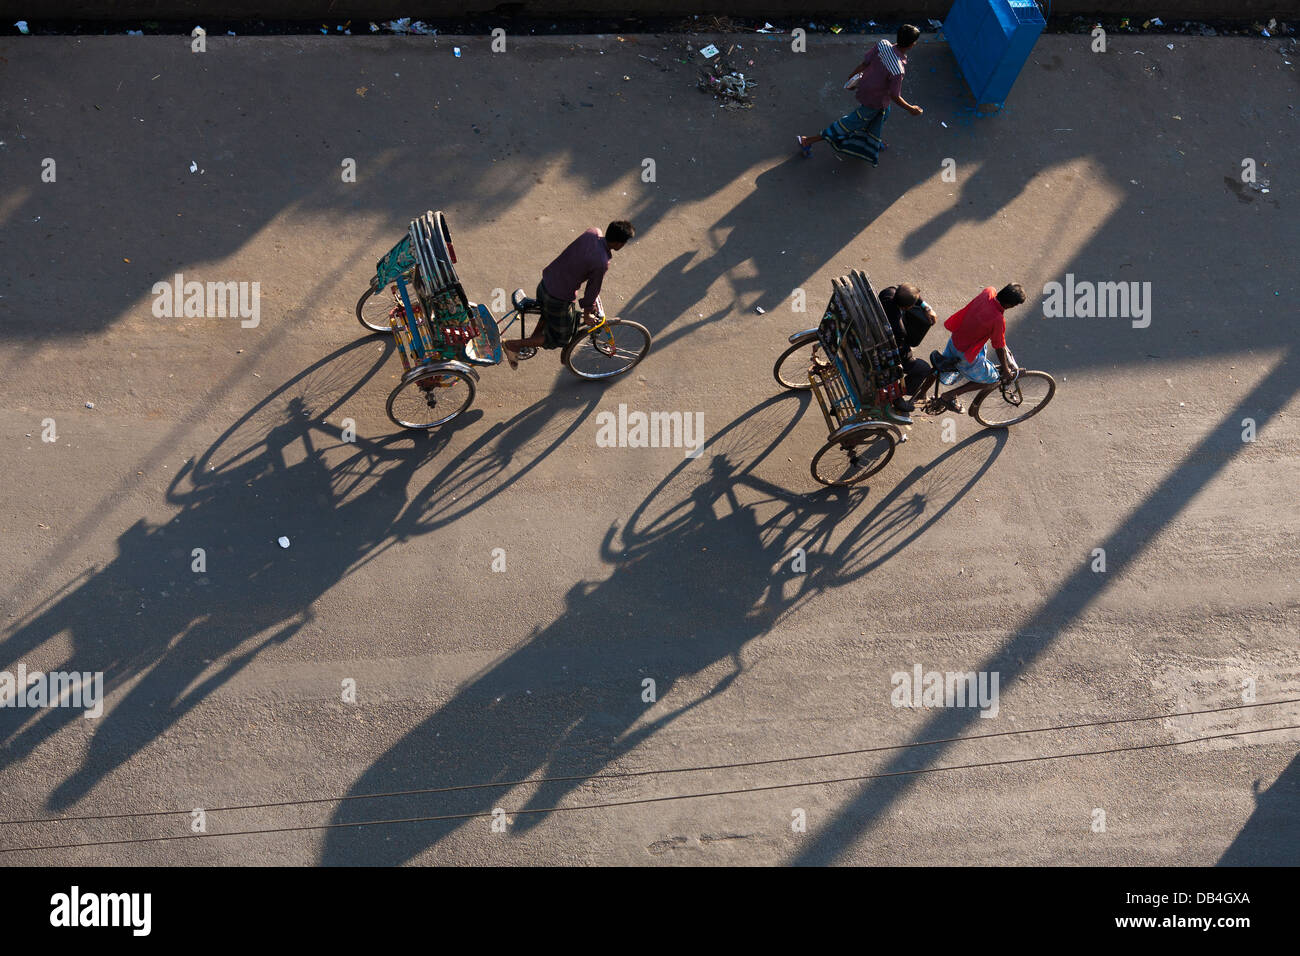 View from above of rickshaws casting shadows on the road as they ferry passengers along the streets of Chittagong Bangladesh Stock Photo